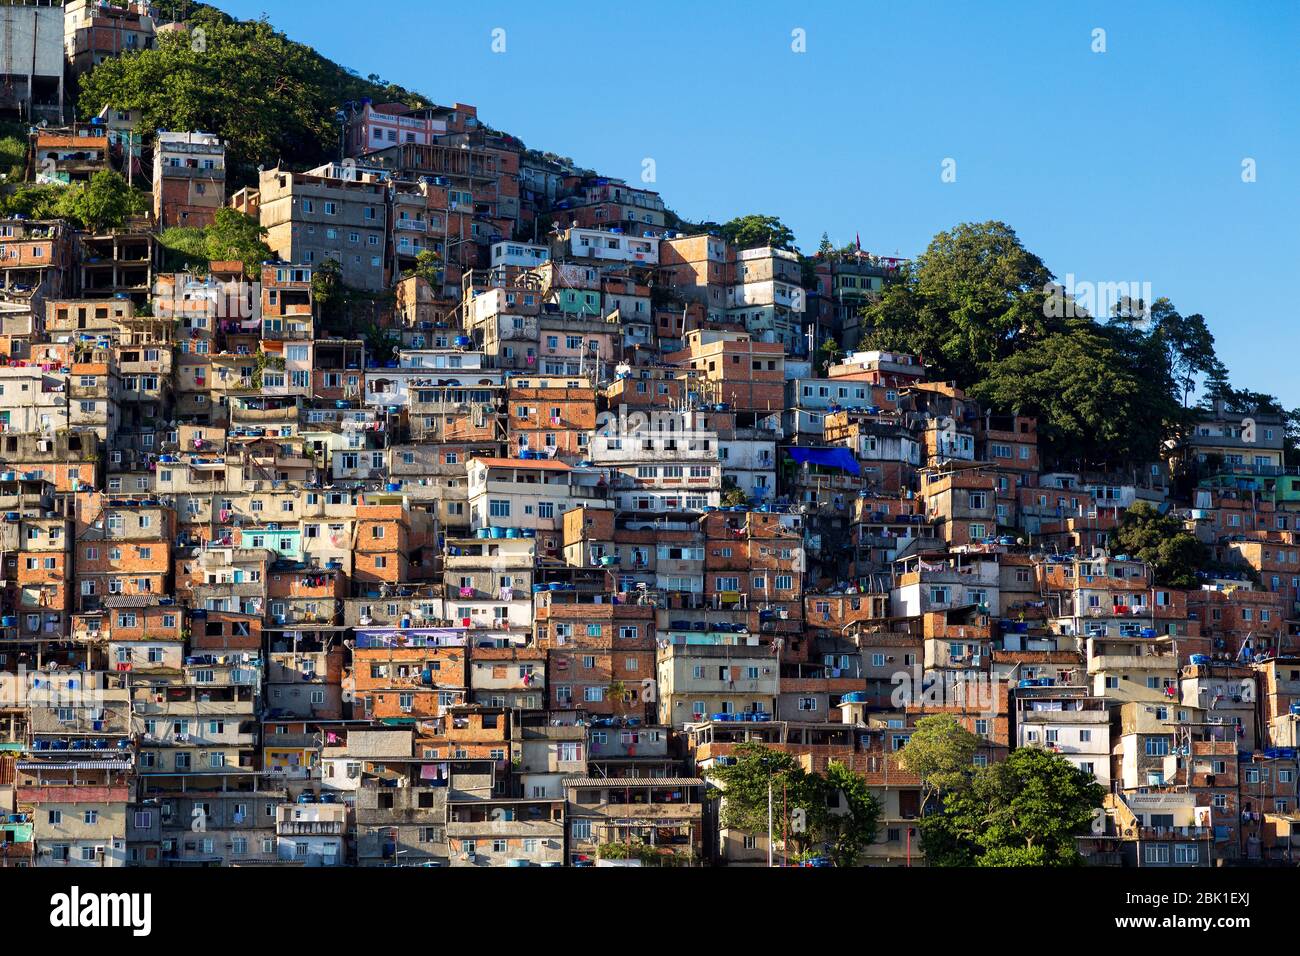 Favela of Rio de Janeiro, Brazil. Colorful houses in a hill. Zona Sul of Rio. Poor neighborhoods of the city. Stock Photo